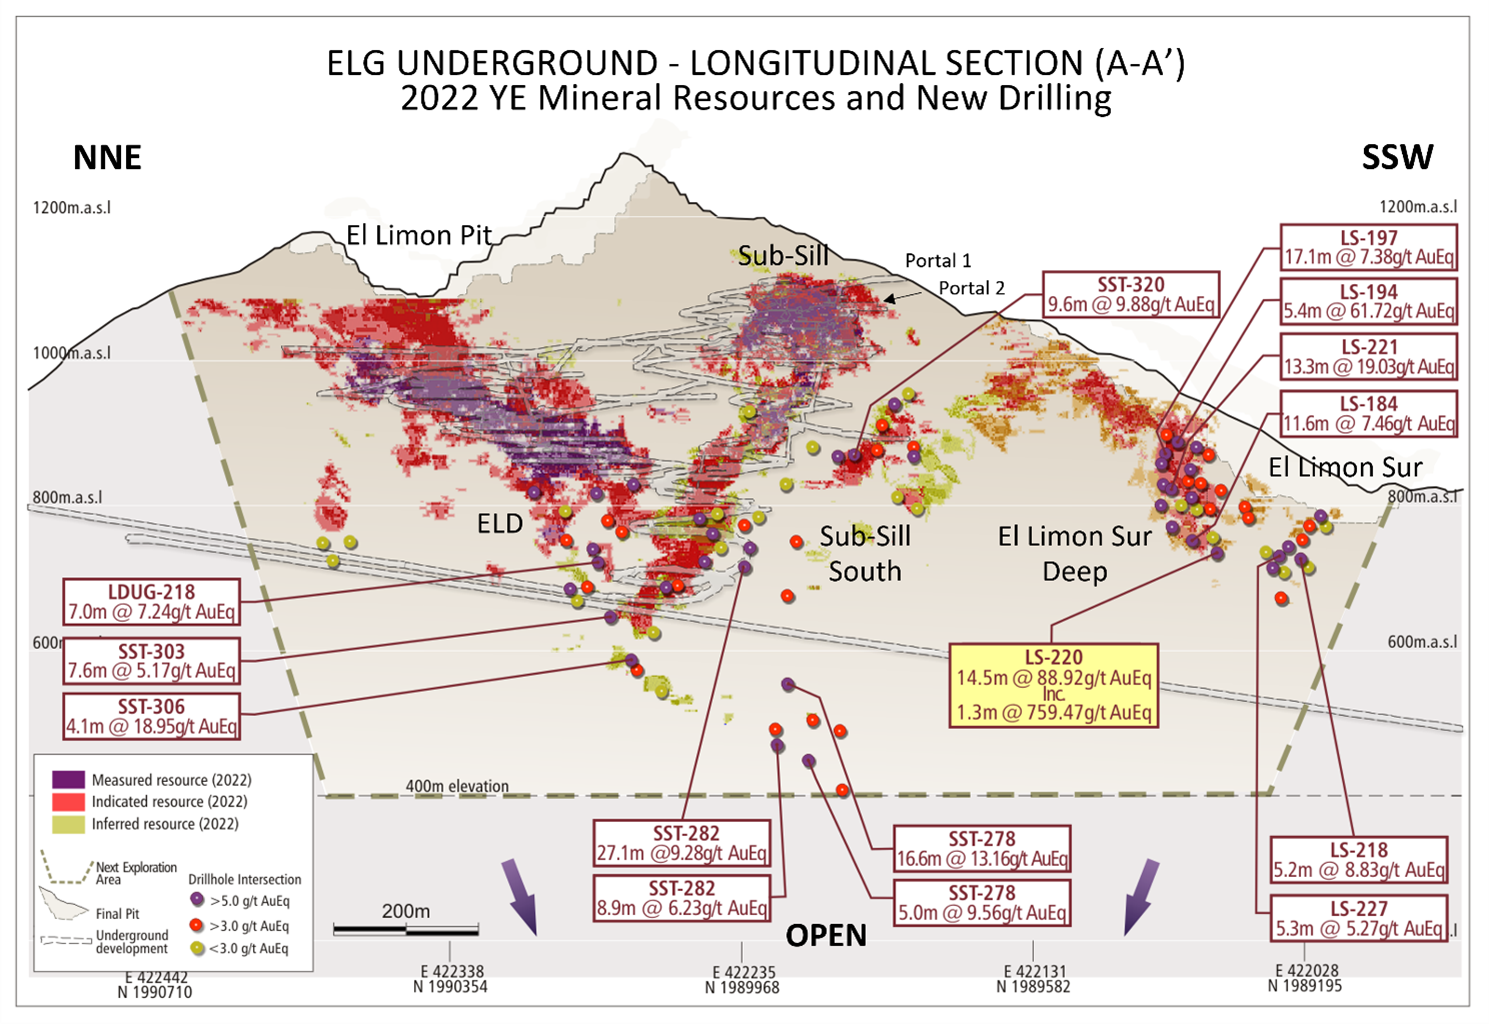 Drilling program highlights at the ELG Underground (Long Section)